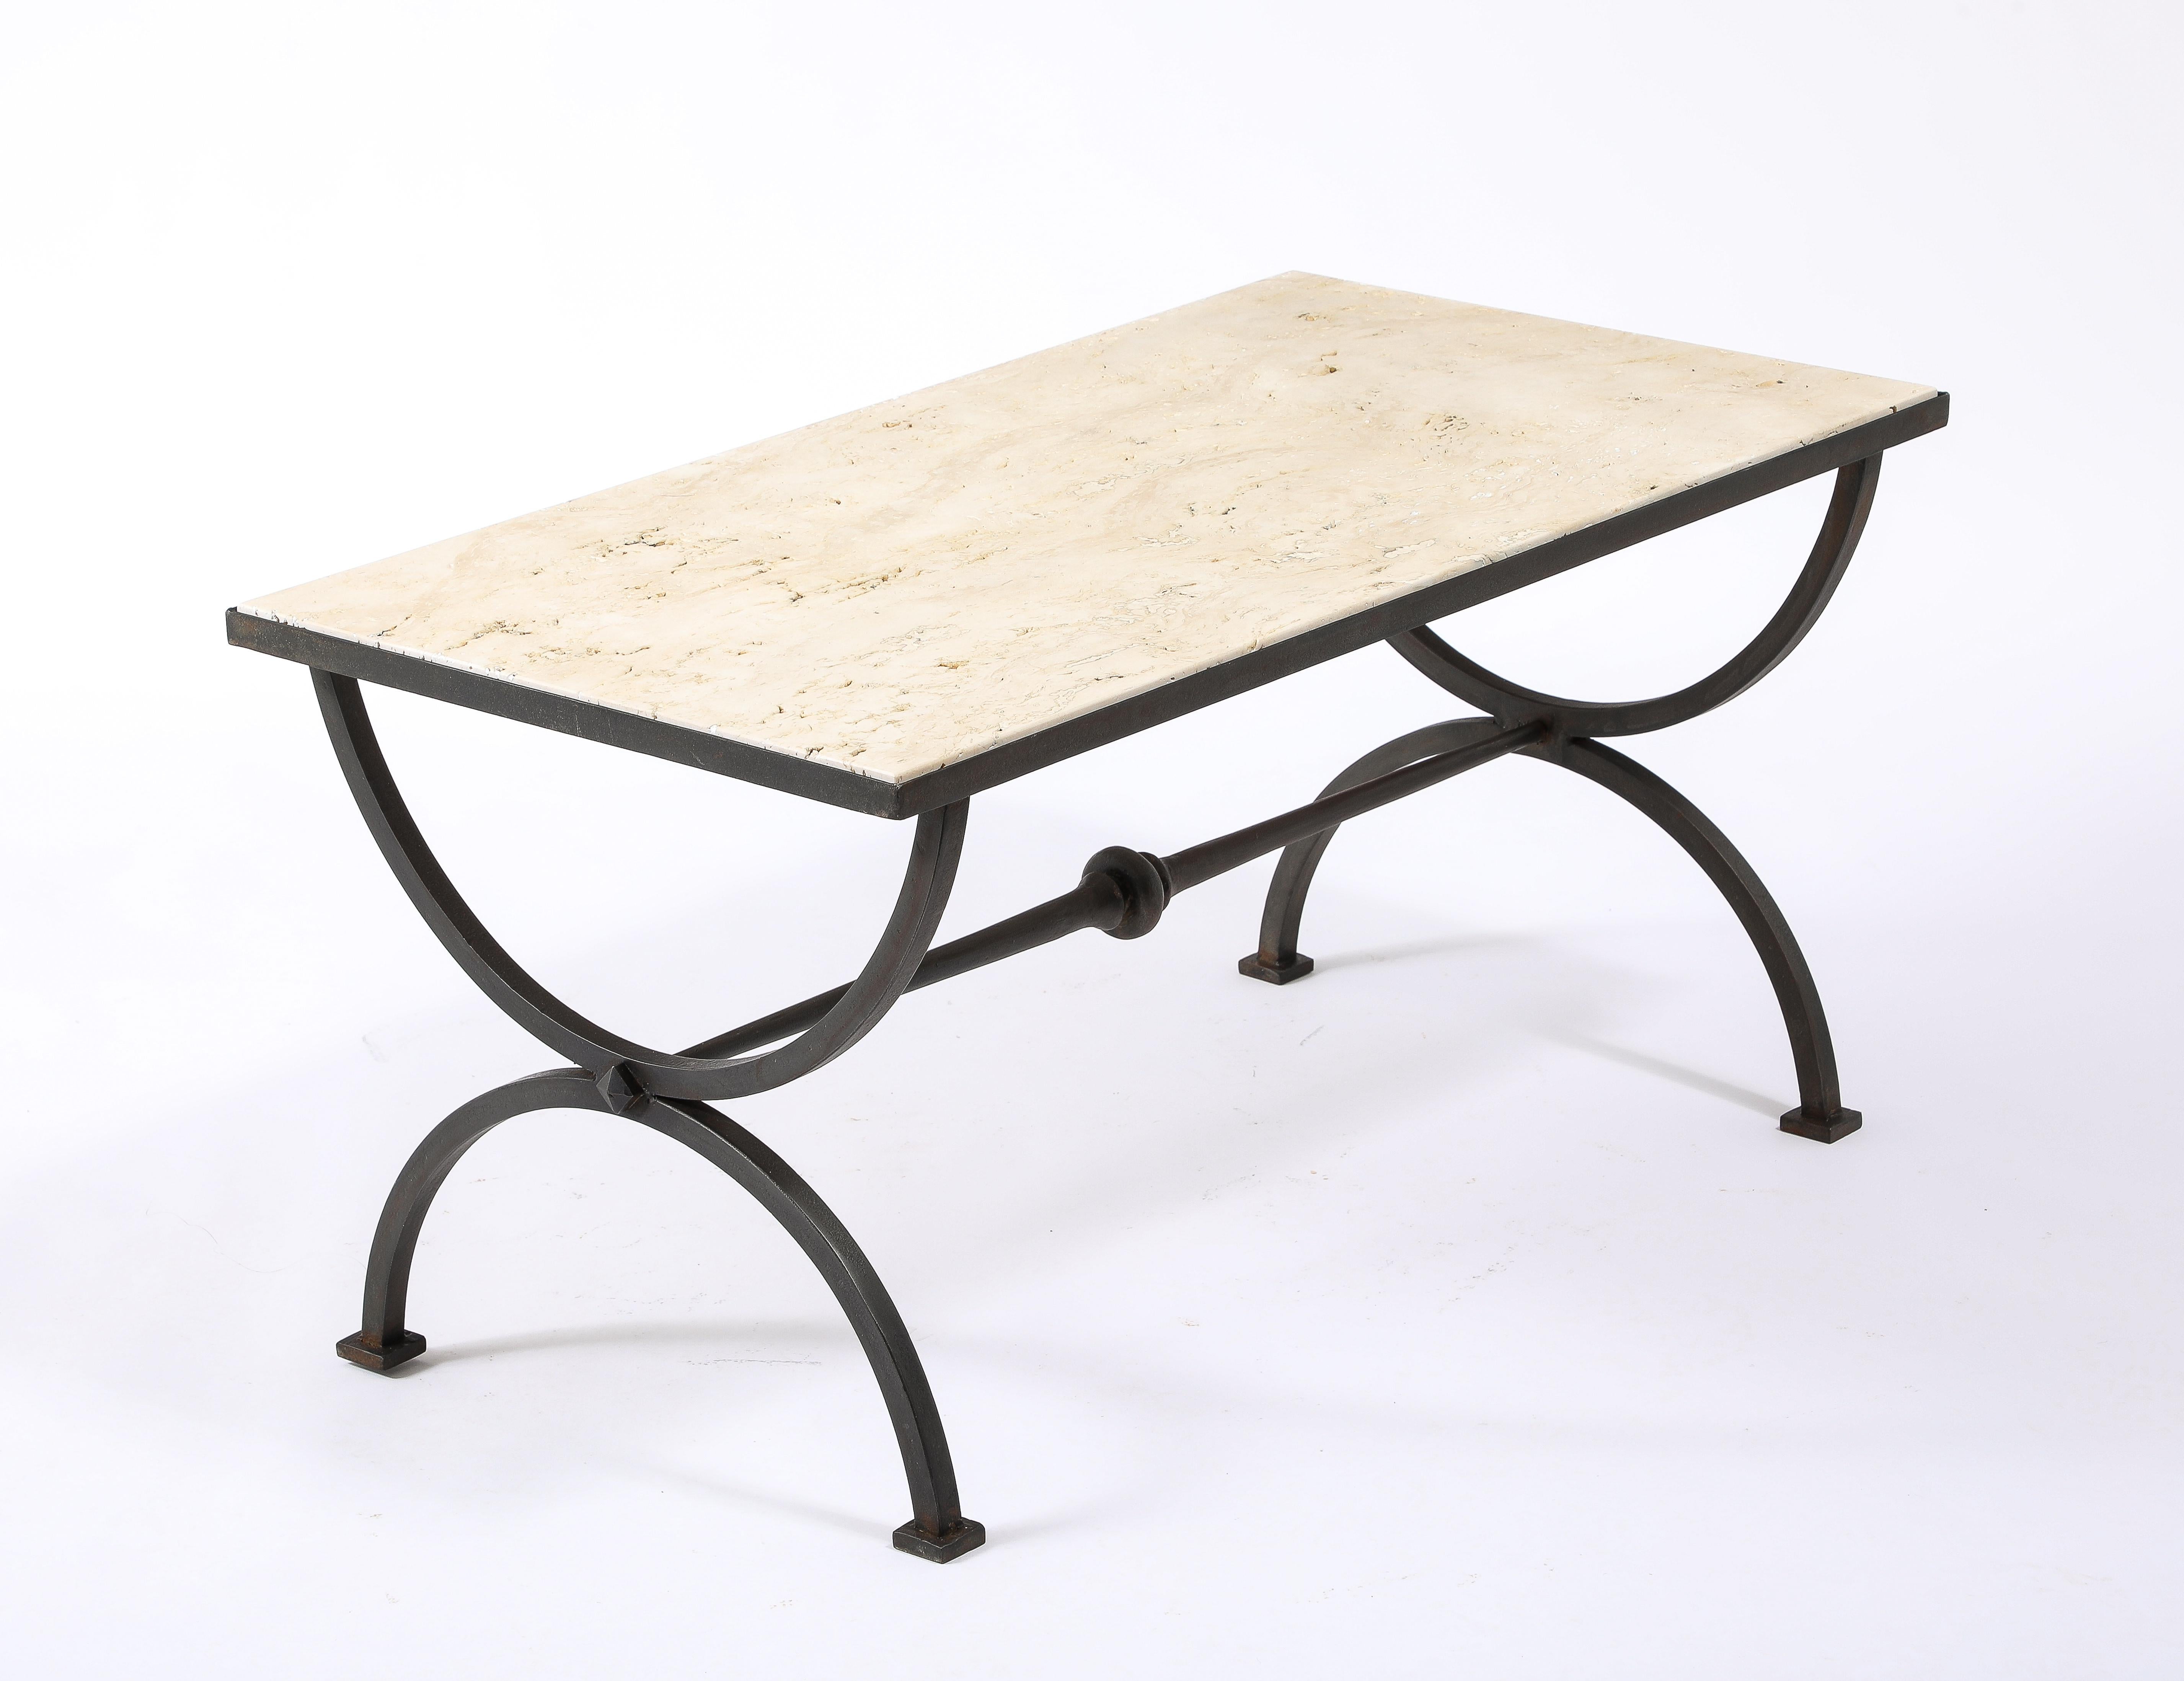 Travertin Marble & Wrought Iron Coffee Table, France 1940's For Sale 5